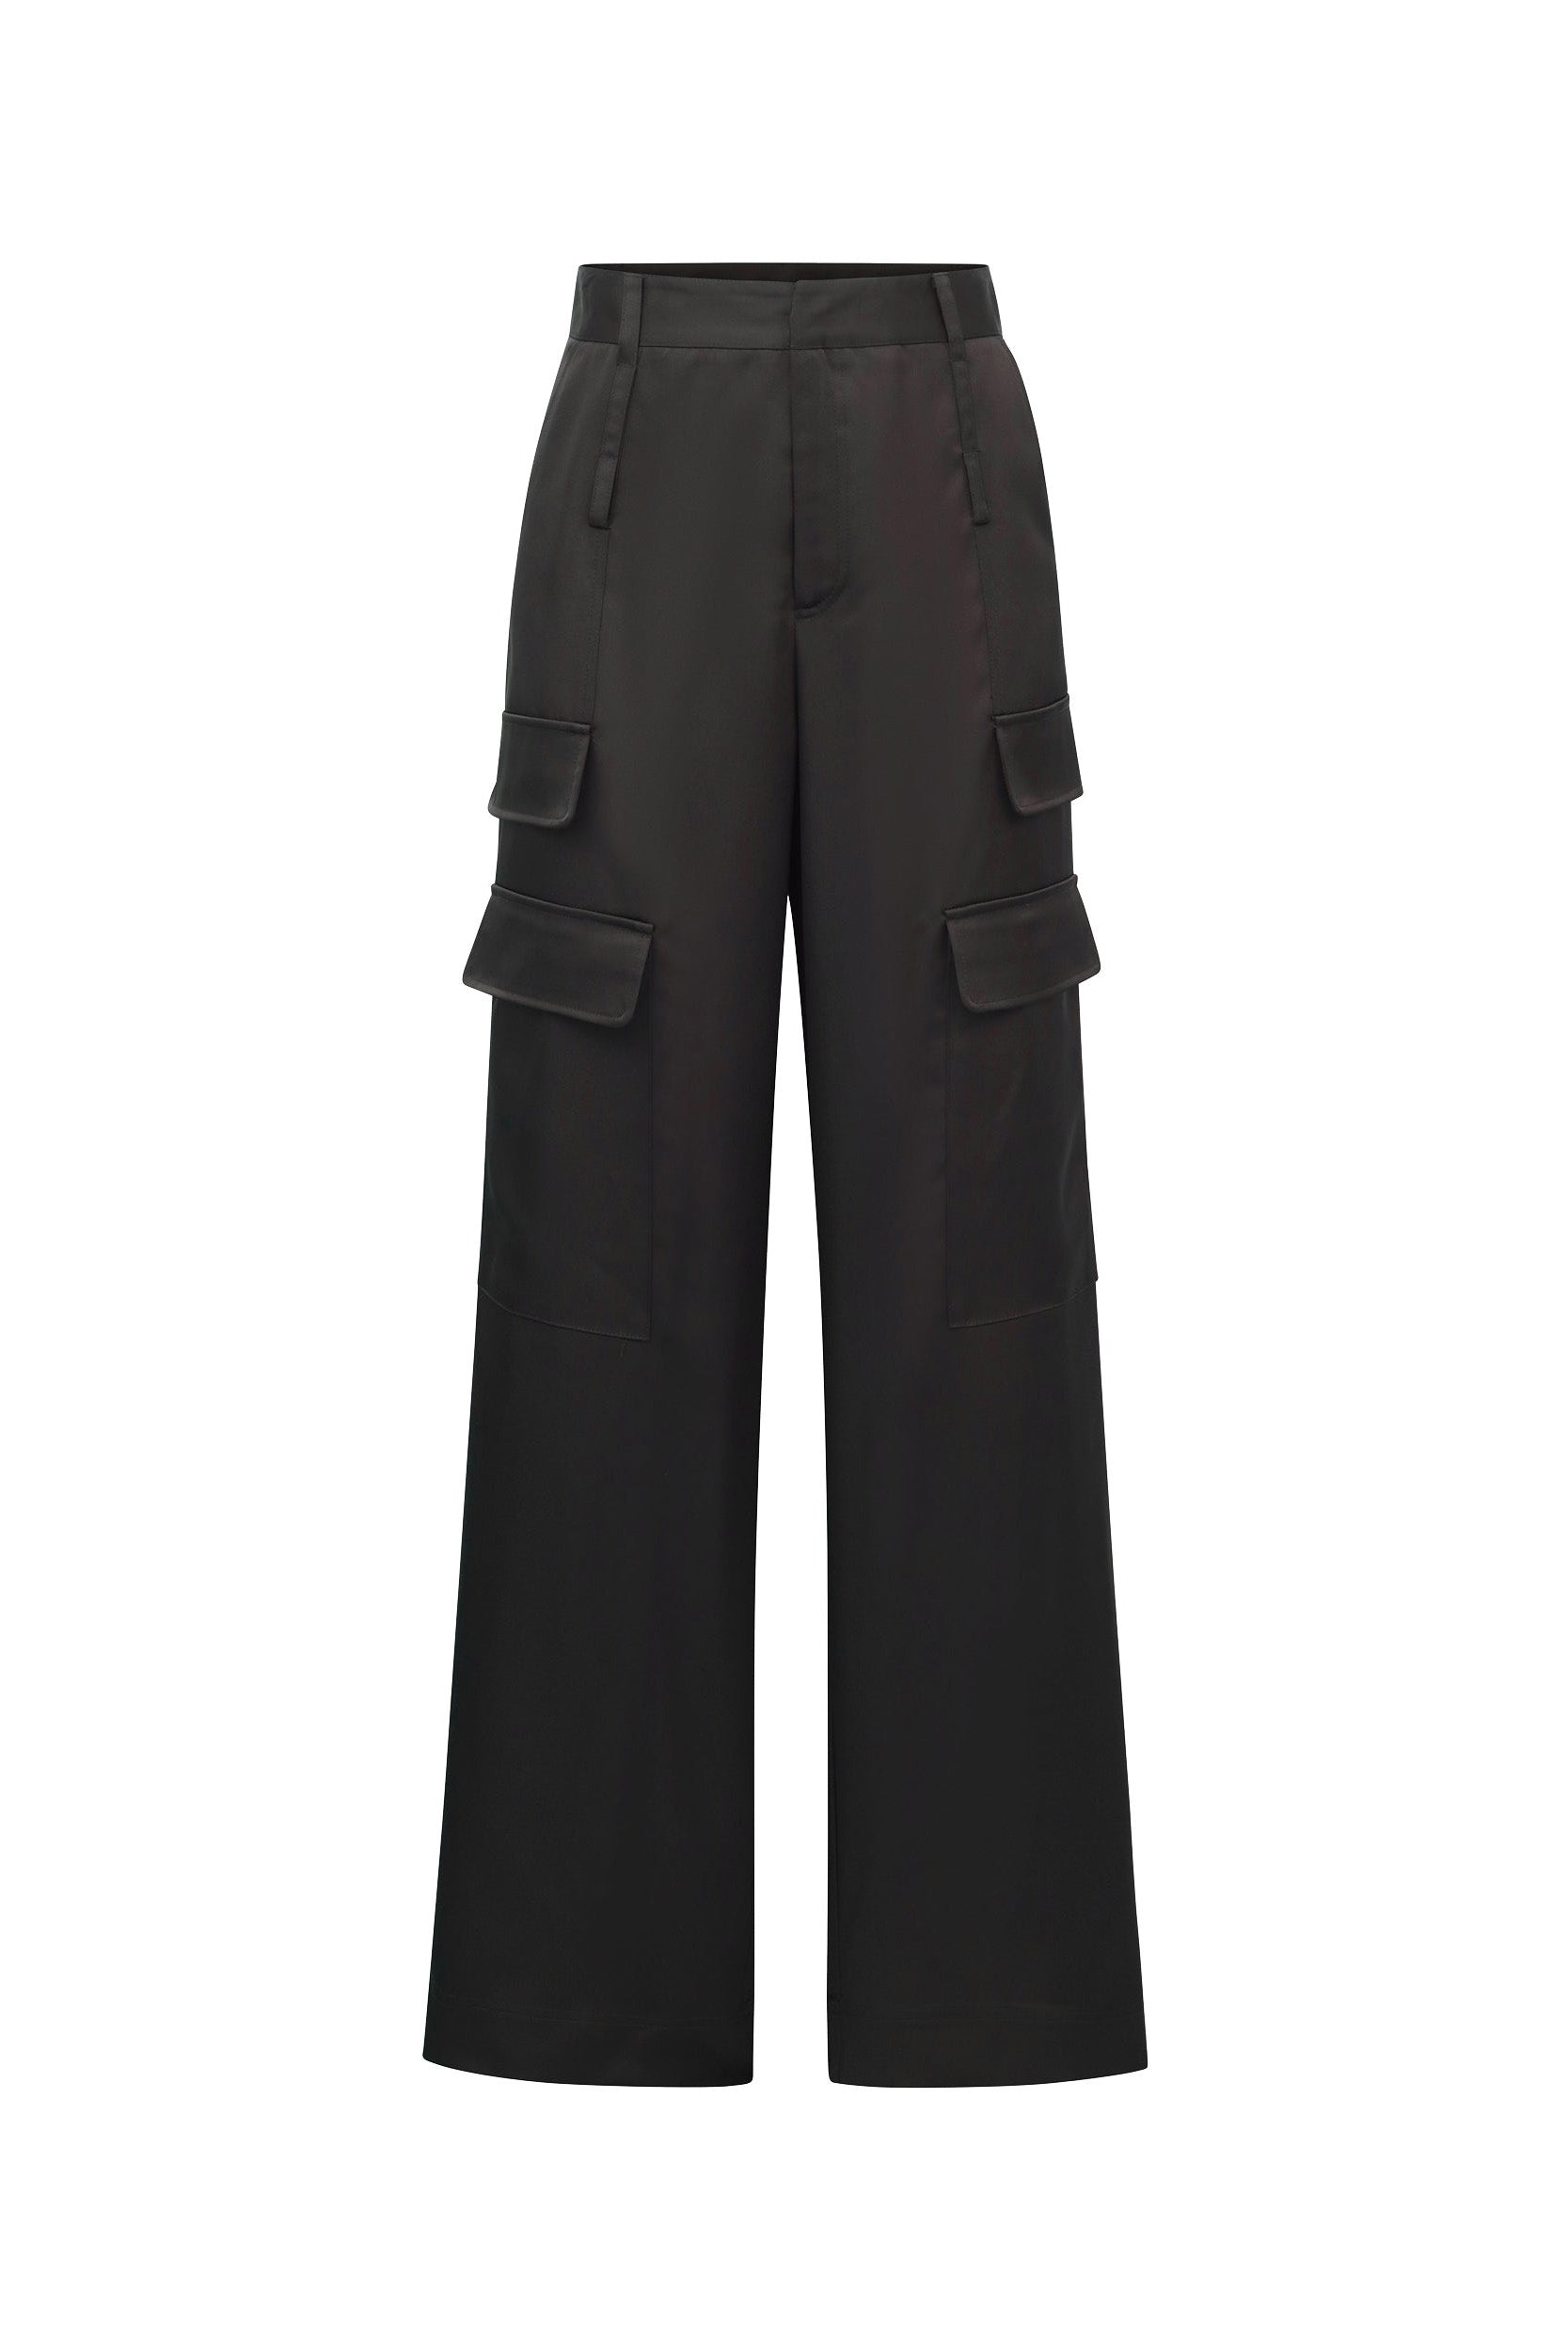 The Milan Satin Cargo Pant in black is displayed, showcasing a mid-rise waist and wide legs. Crafted from luxurious satin fabric, these versatile trousers feature multiple large side pockets and a sleek, minimalist design, complete with belt loops around the waist.